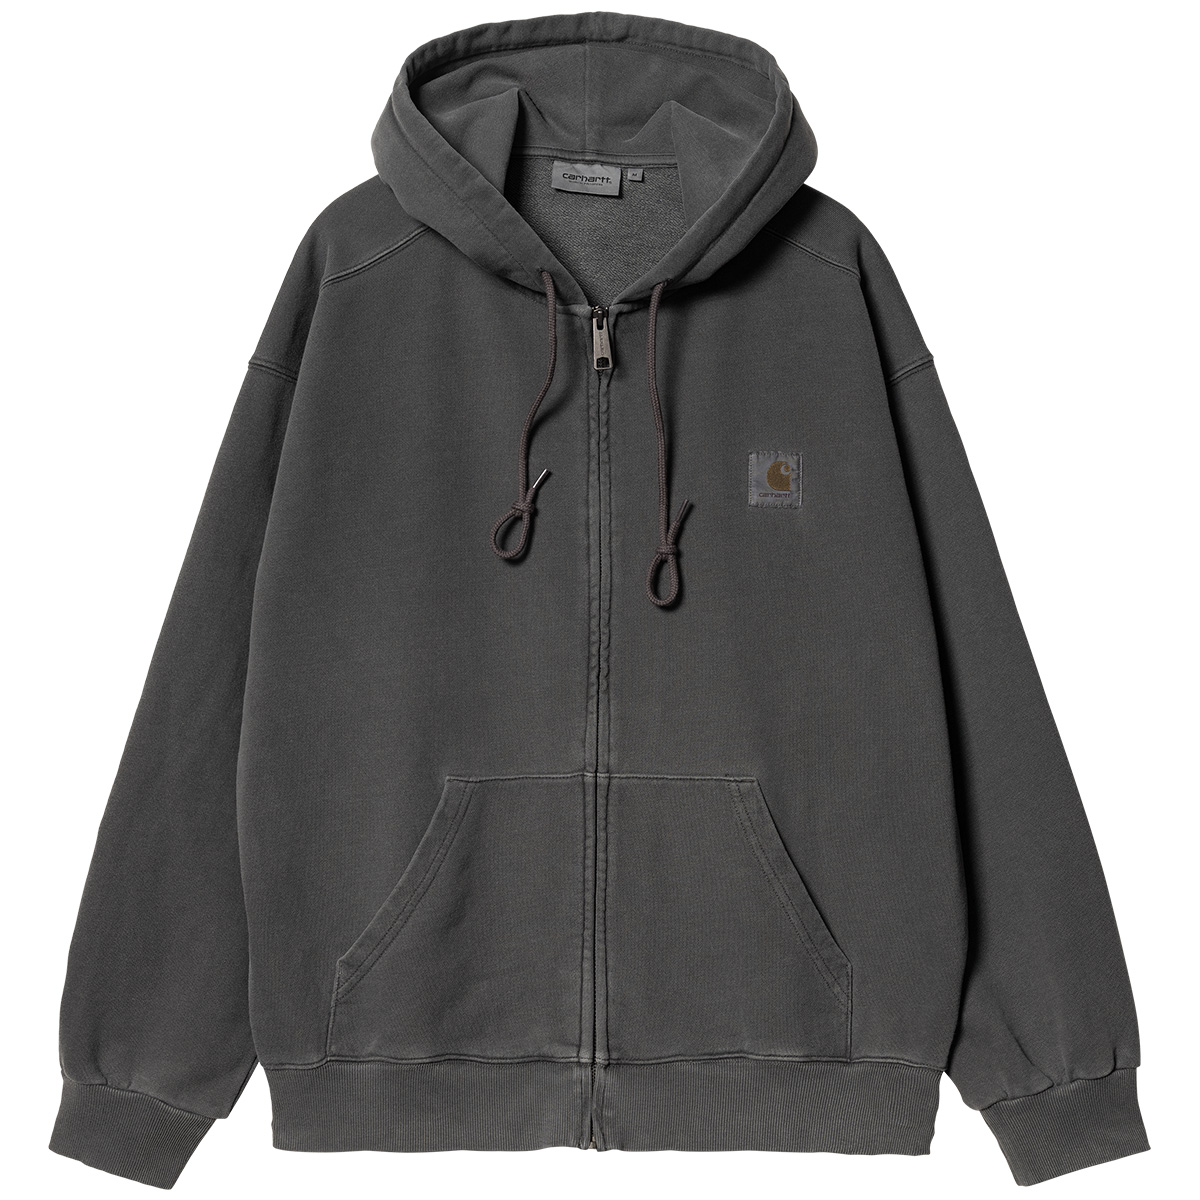 Carhartt WIP Hooded Nelson Jacket Charcoal